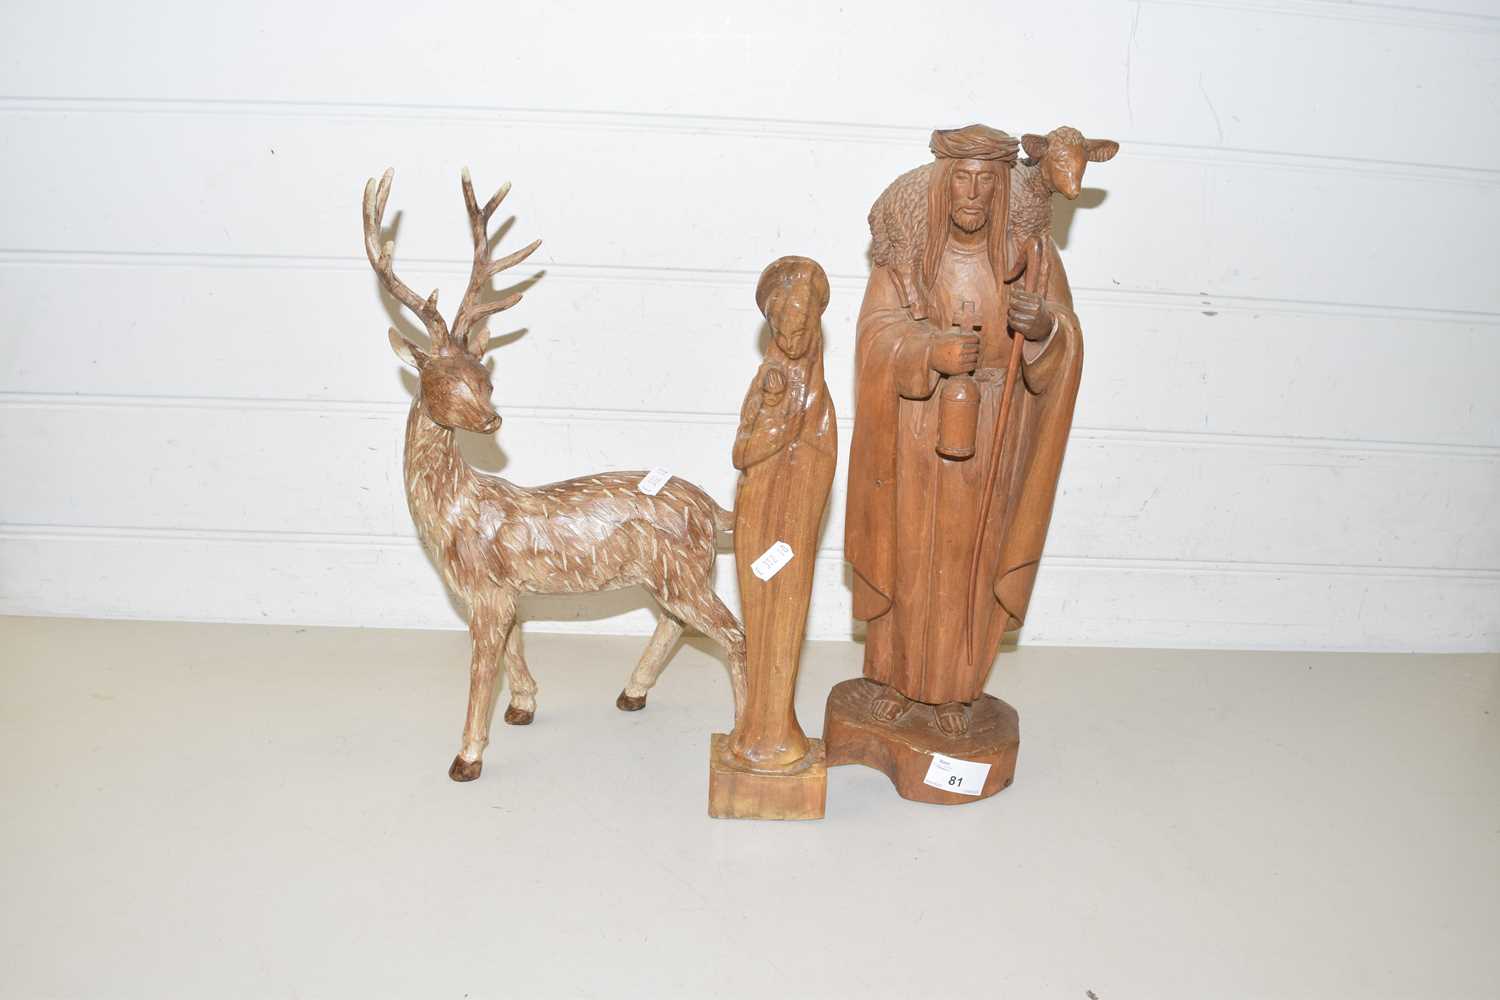 Mixed Lot: Carved wooden model of Christ together with further model of the Virgin Mary and a